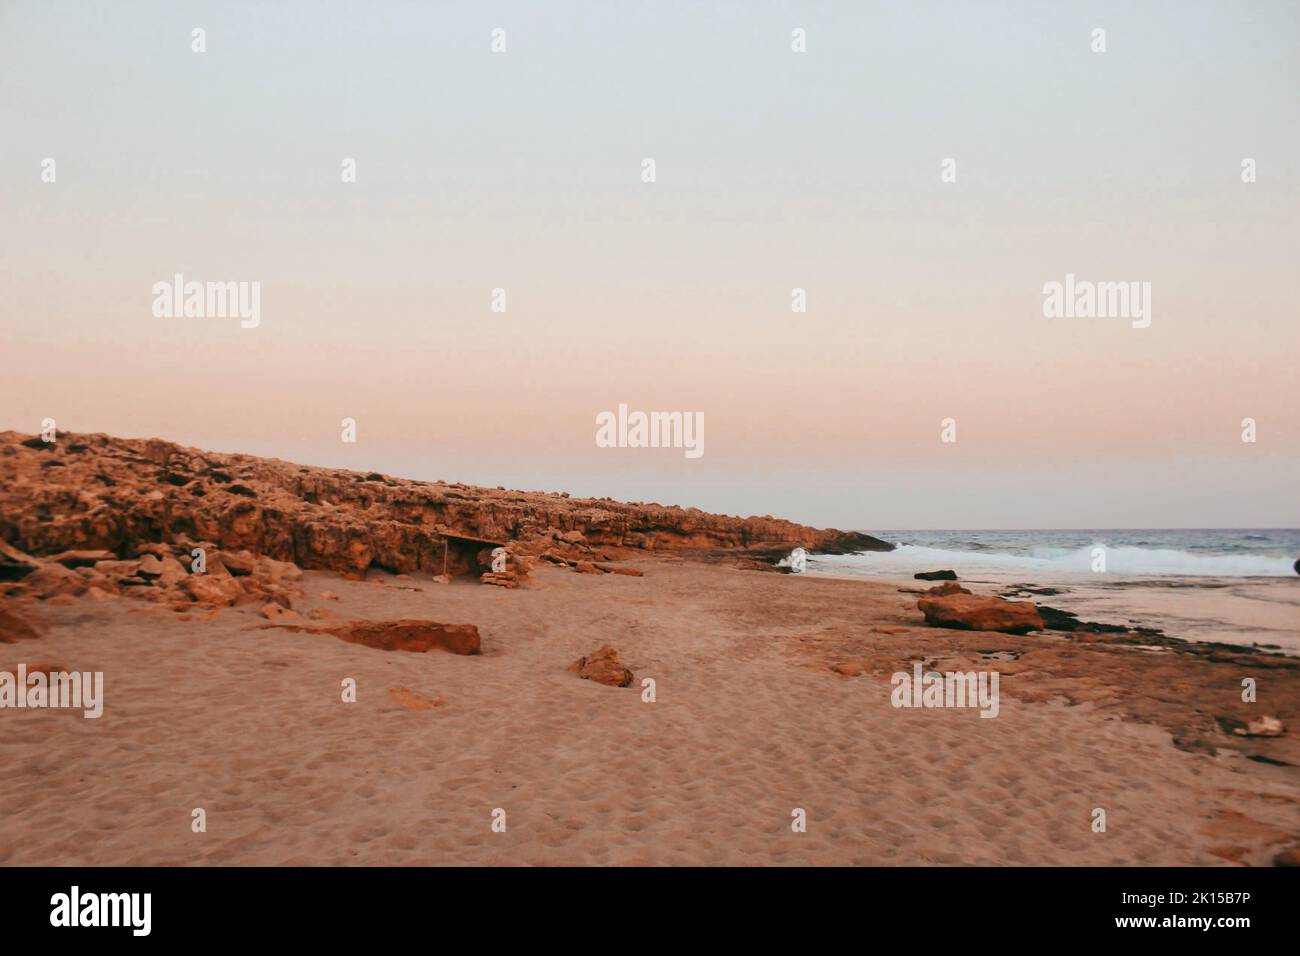 Beautiful views of the sea in Famagusta Bay from a rocky beach at sunset near Ayia Napa, Cyprus Stock Photo